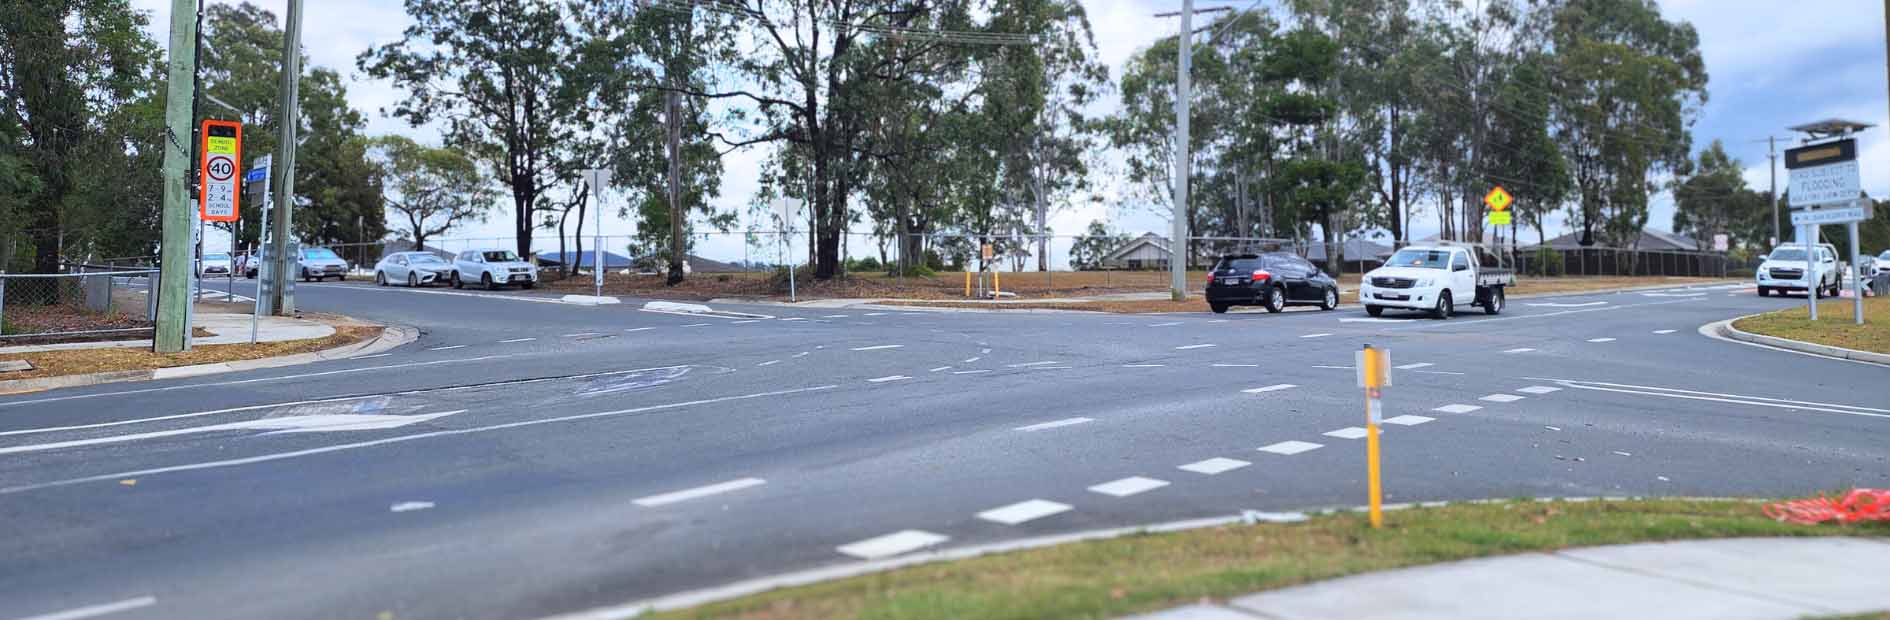 Logan Reserve Road and School Road intersection